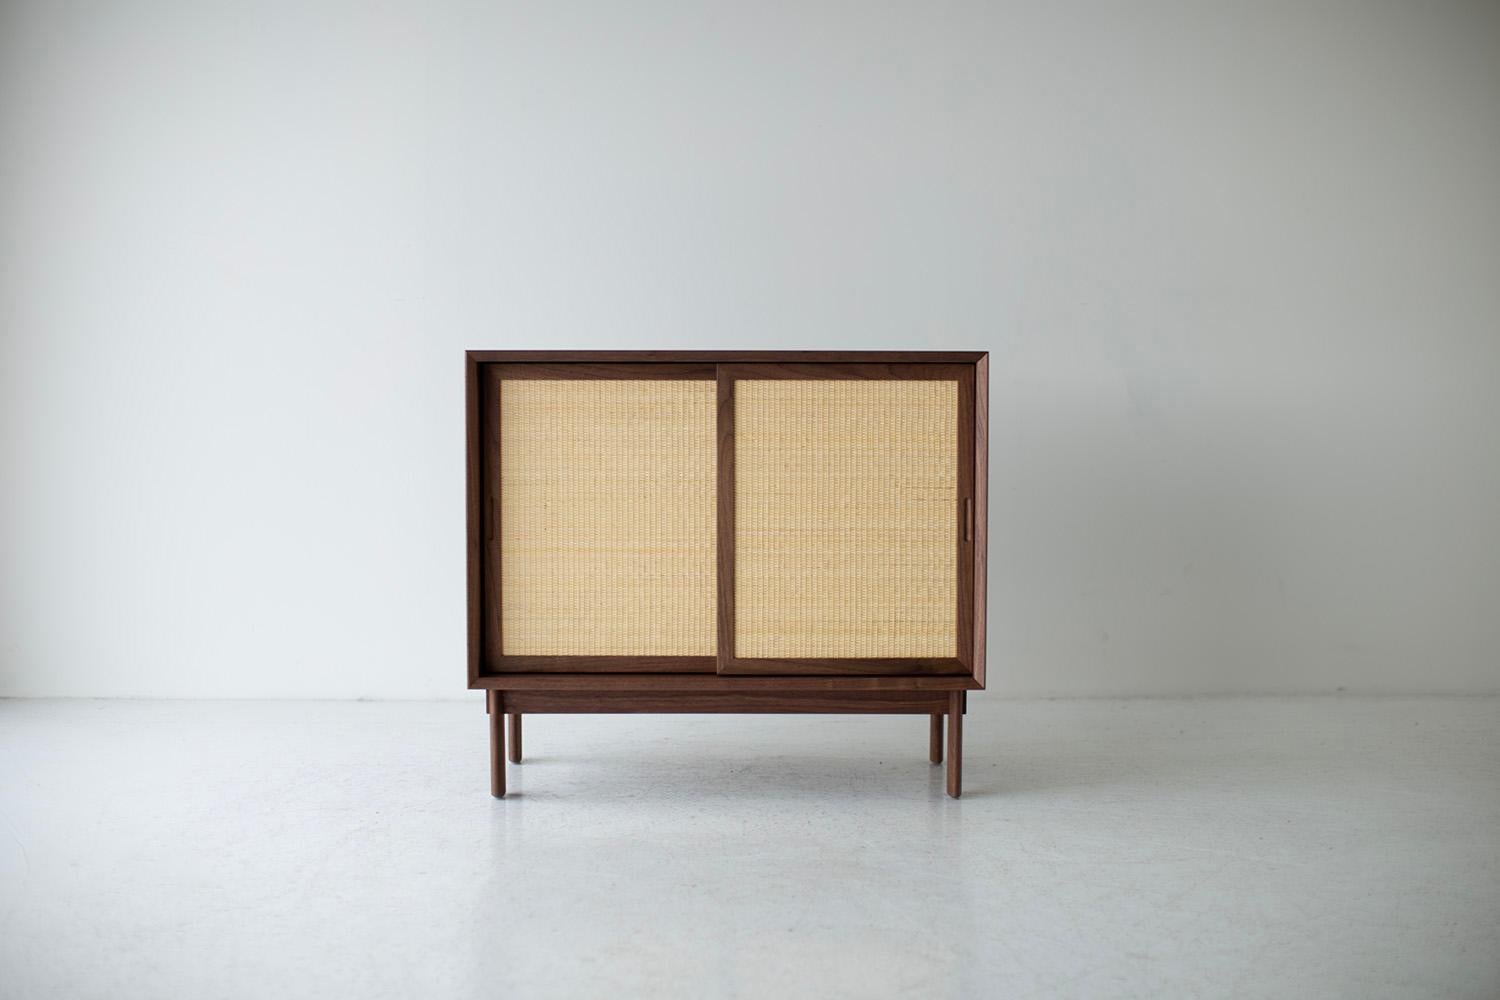 CraftAssociates Credenza, Peabody Modern Walnut Credenza, Cane

The CraftAssociates Credenza, Peabody Modern Walnut Credenza, Cane is expertly hand crafted. The Peabody collection pieces are licensed reintroductions for Craft Associates®. This